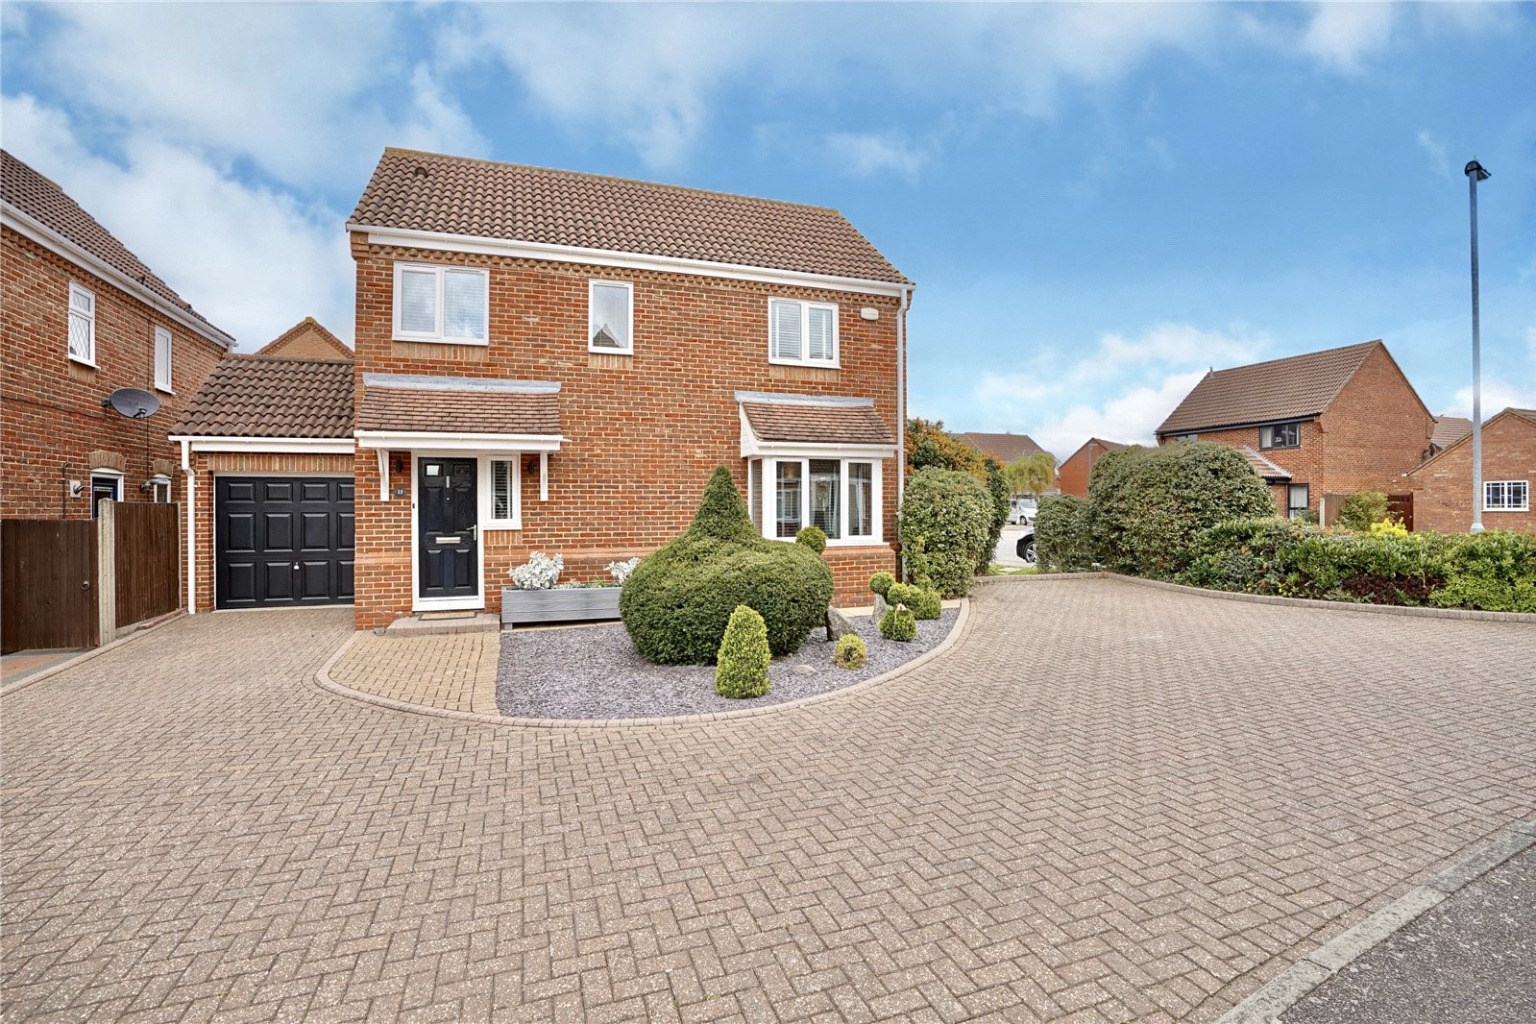 3 bed detached house for sale in Popham Close, St. Neots - Property Image 1